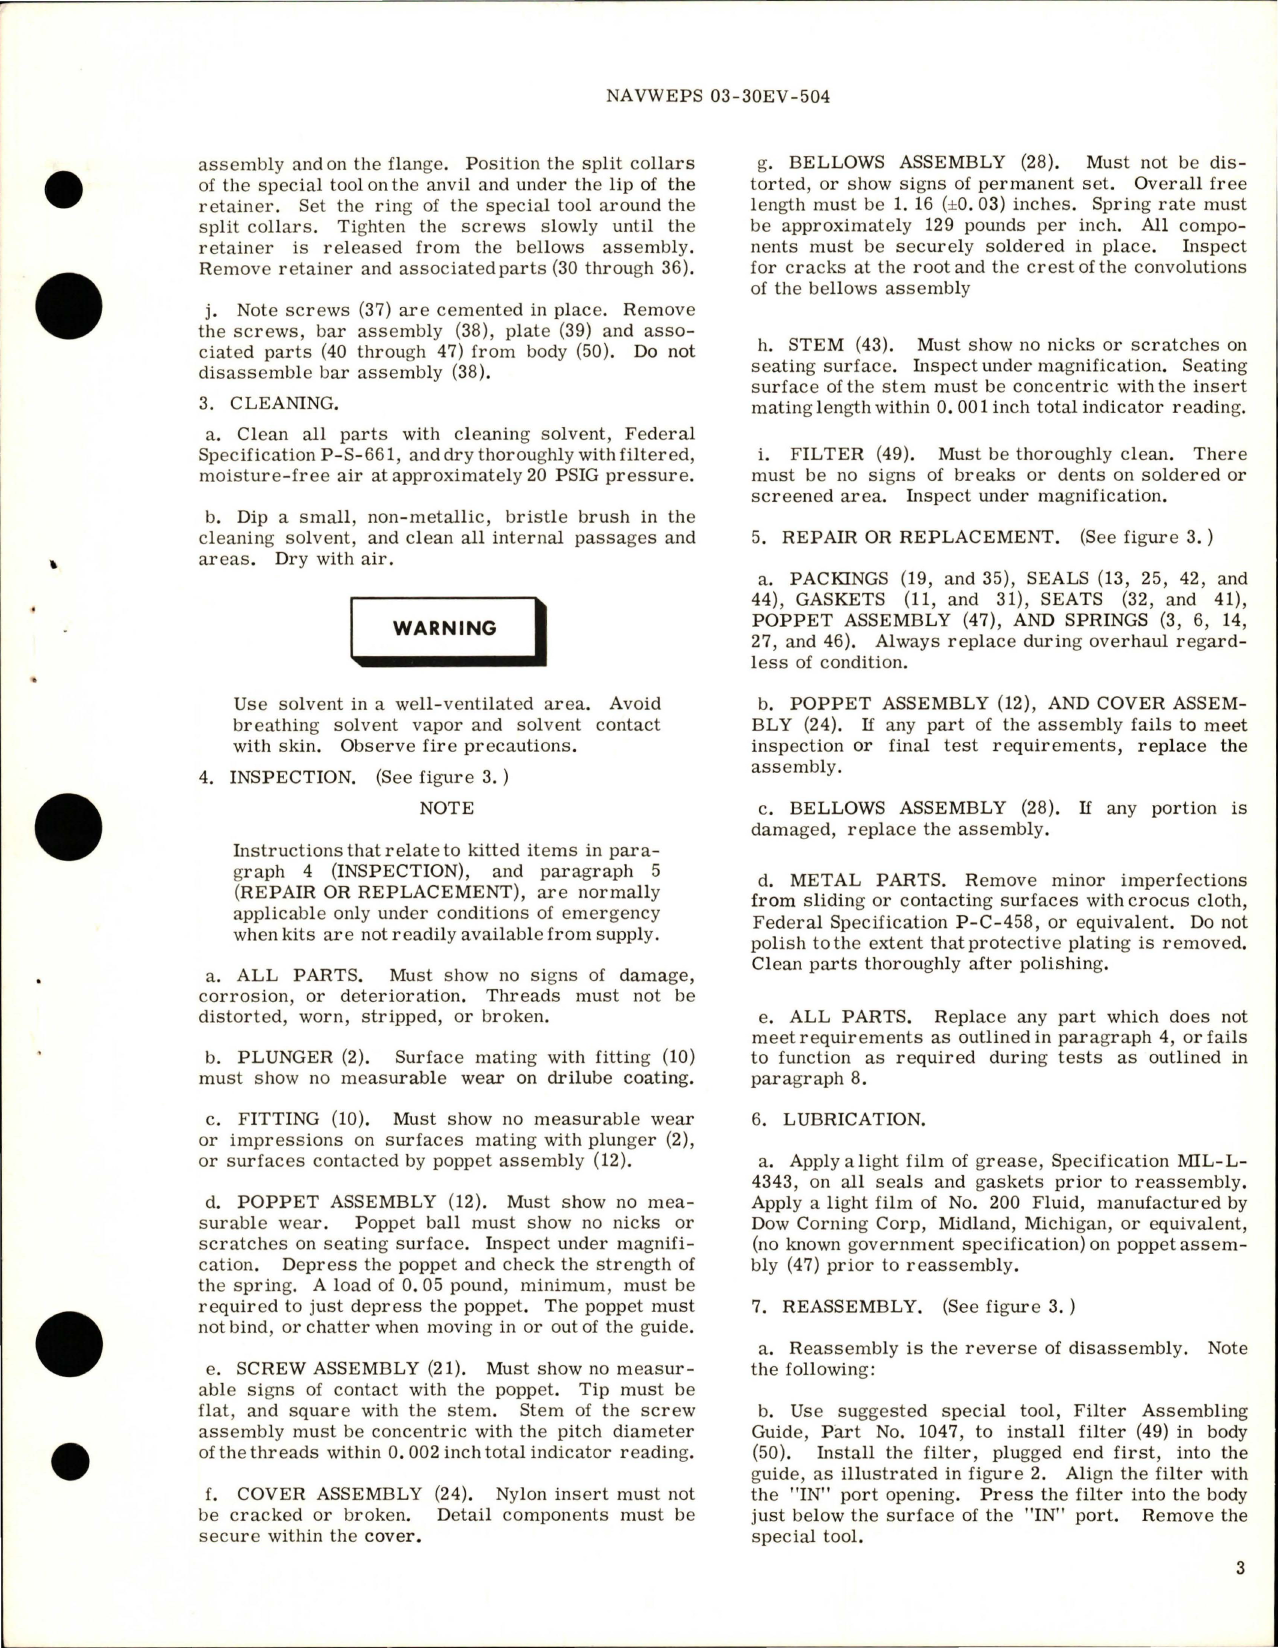 Sample page 5 from AirCorps Library document: Overhaul Instructions with Parts Breakdown for Pressure Regulating Valve